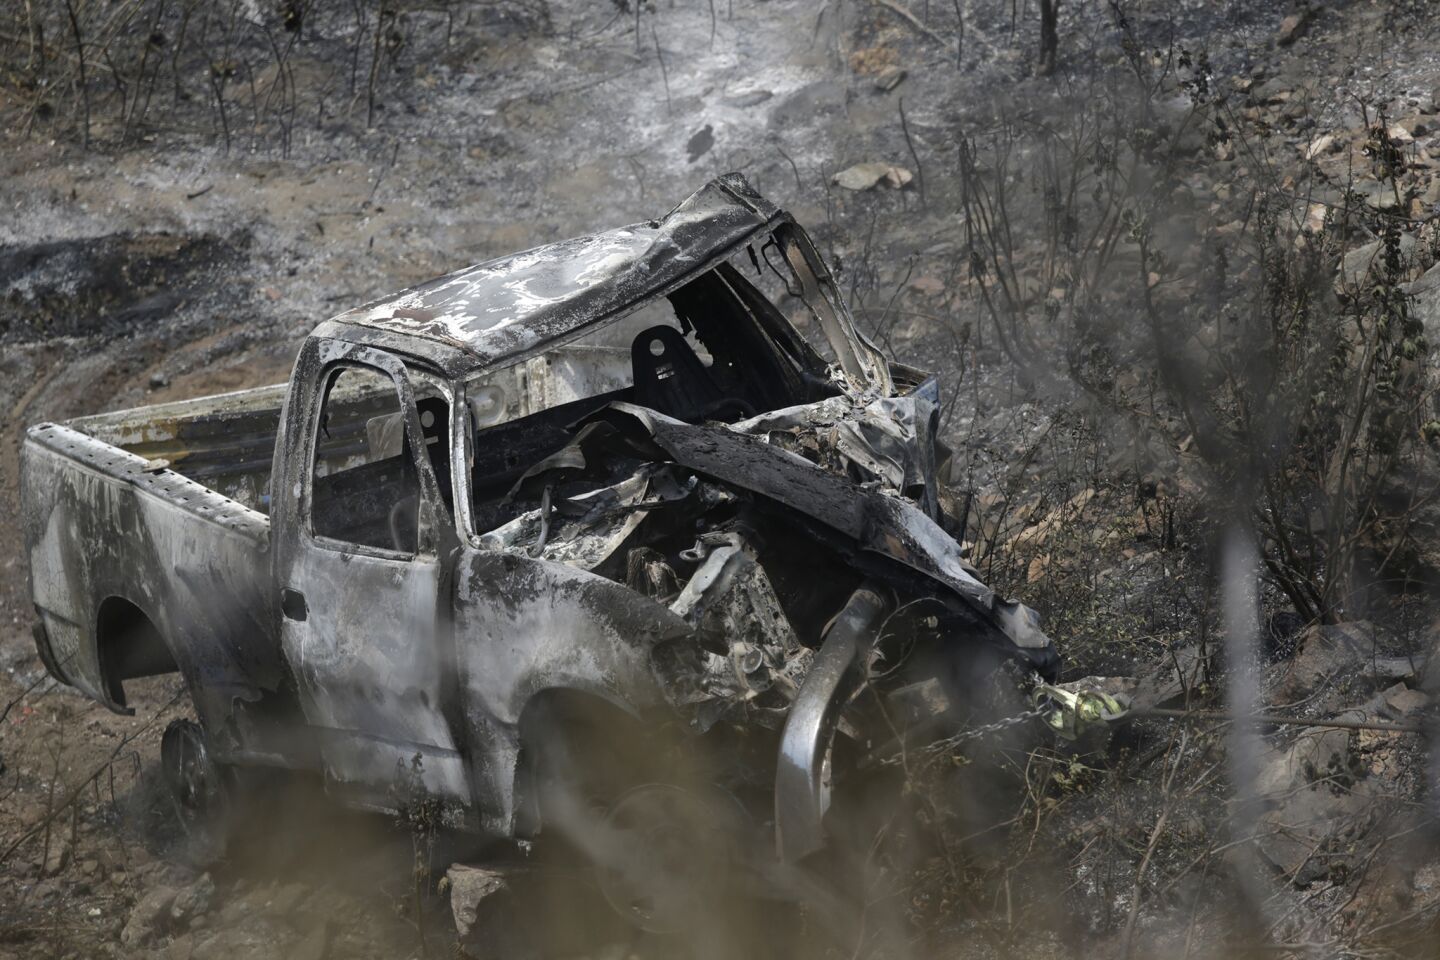 The charred and battered remains of a truck are dragged uphill near the Morris reservoir a day after it crashed and started the Reservoir Fire near Azusa.